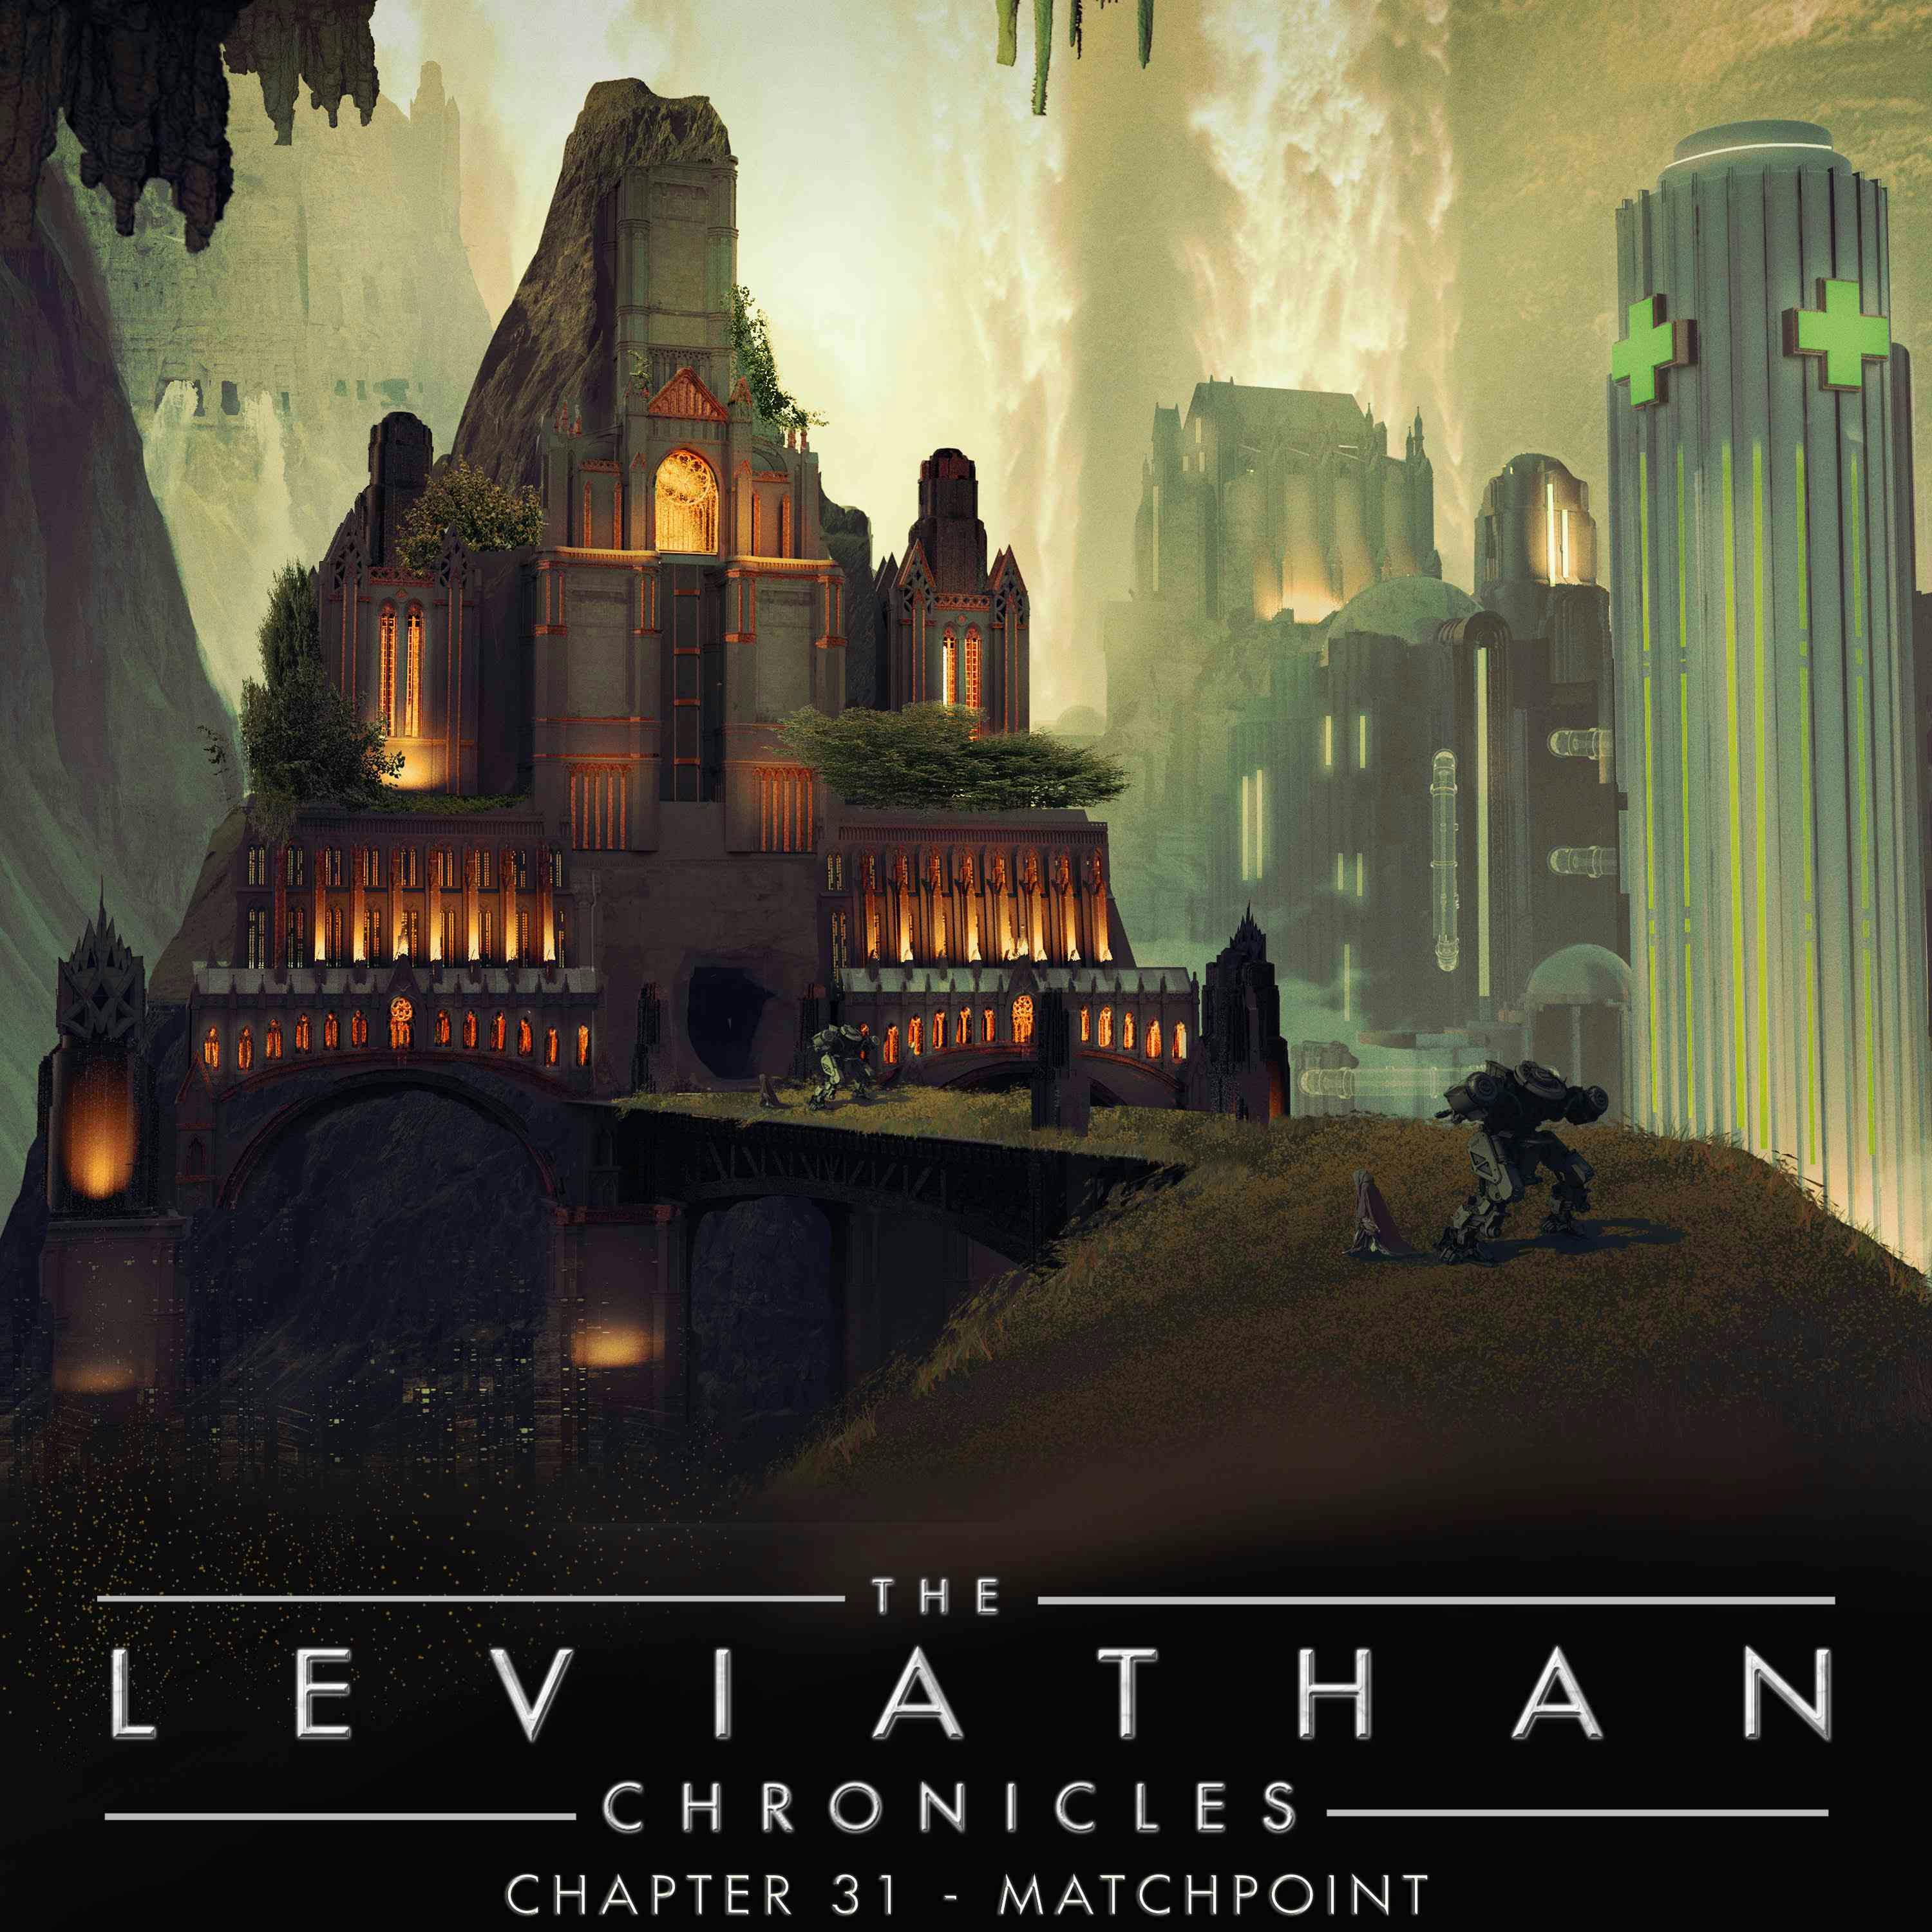 The Leviathan Chronicles | Chapter 31 - Matchpoint